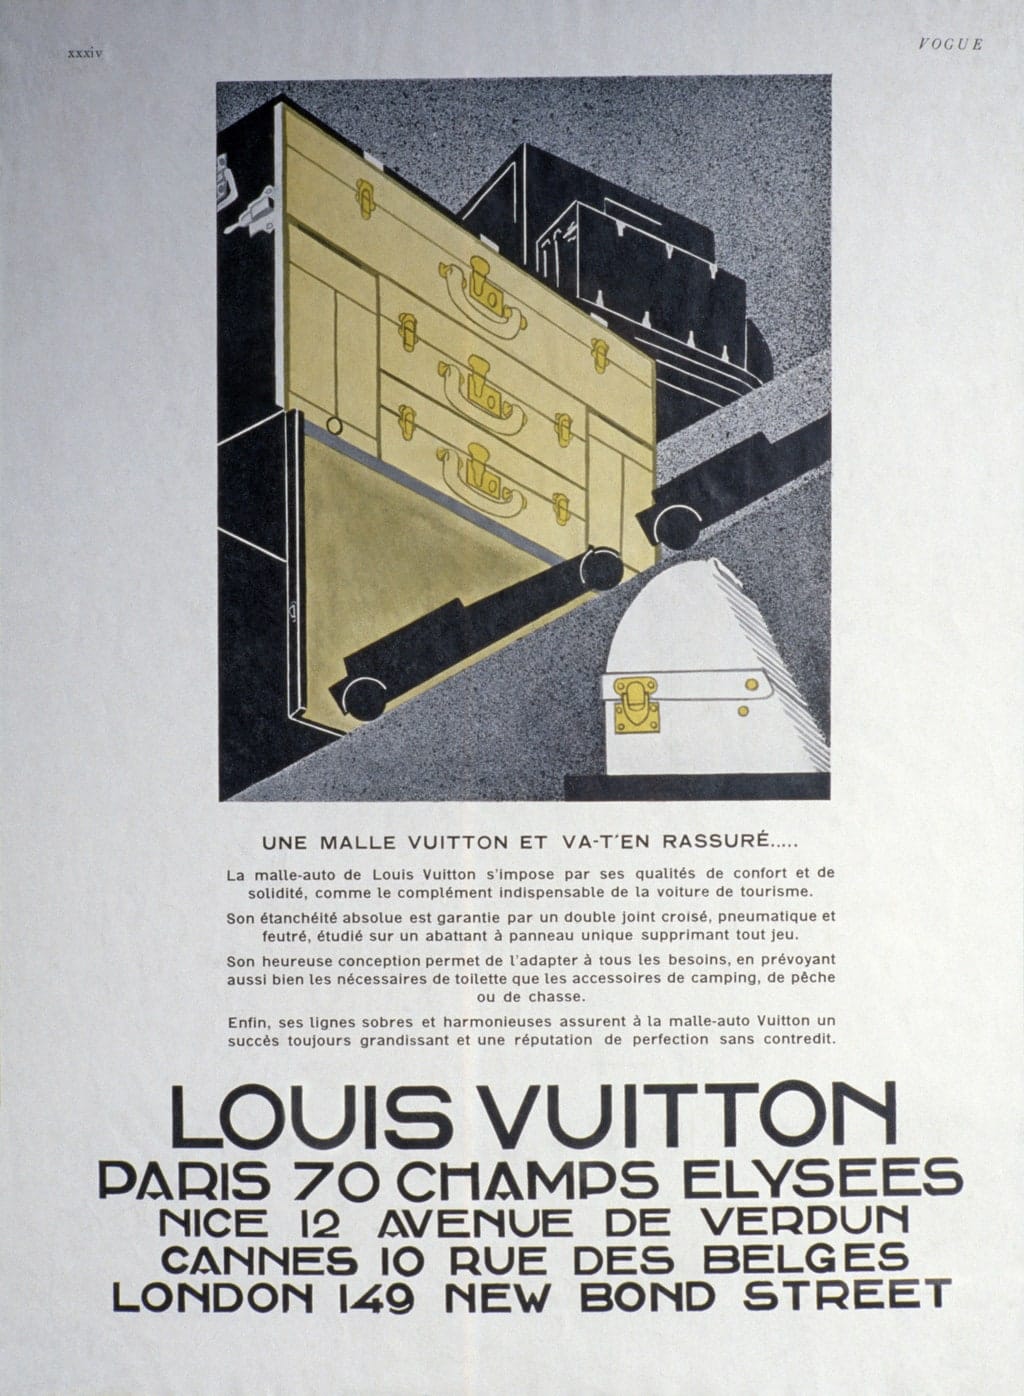 In 1886, Georges Vuitton, Louis Vuitton's son, was a very